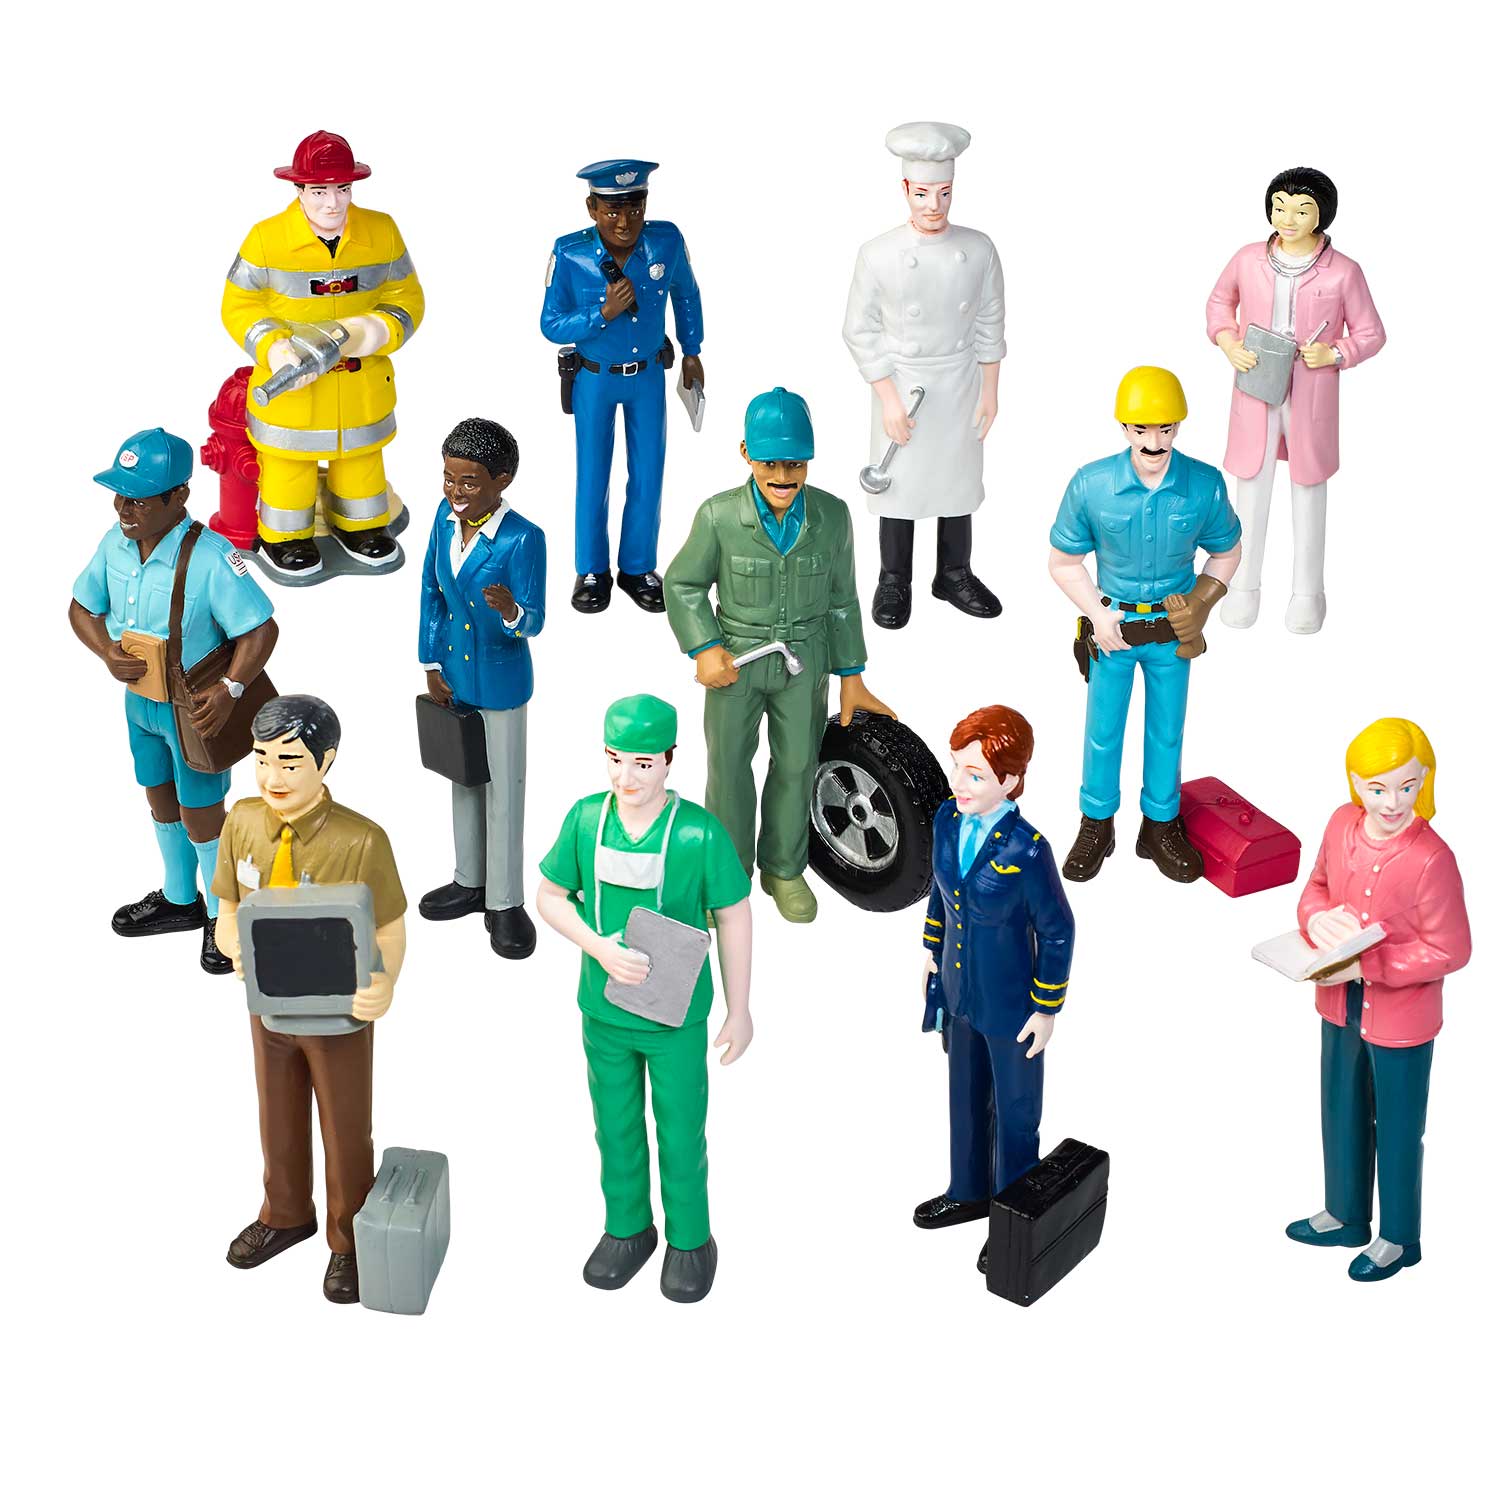 Multi-Ethnic Career US Toy & Constuctive Playthings Marvel MTC-316 Construction Worker Puppet